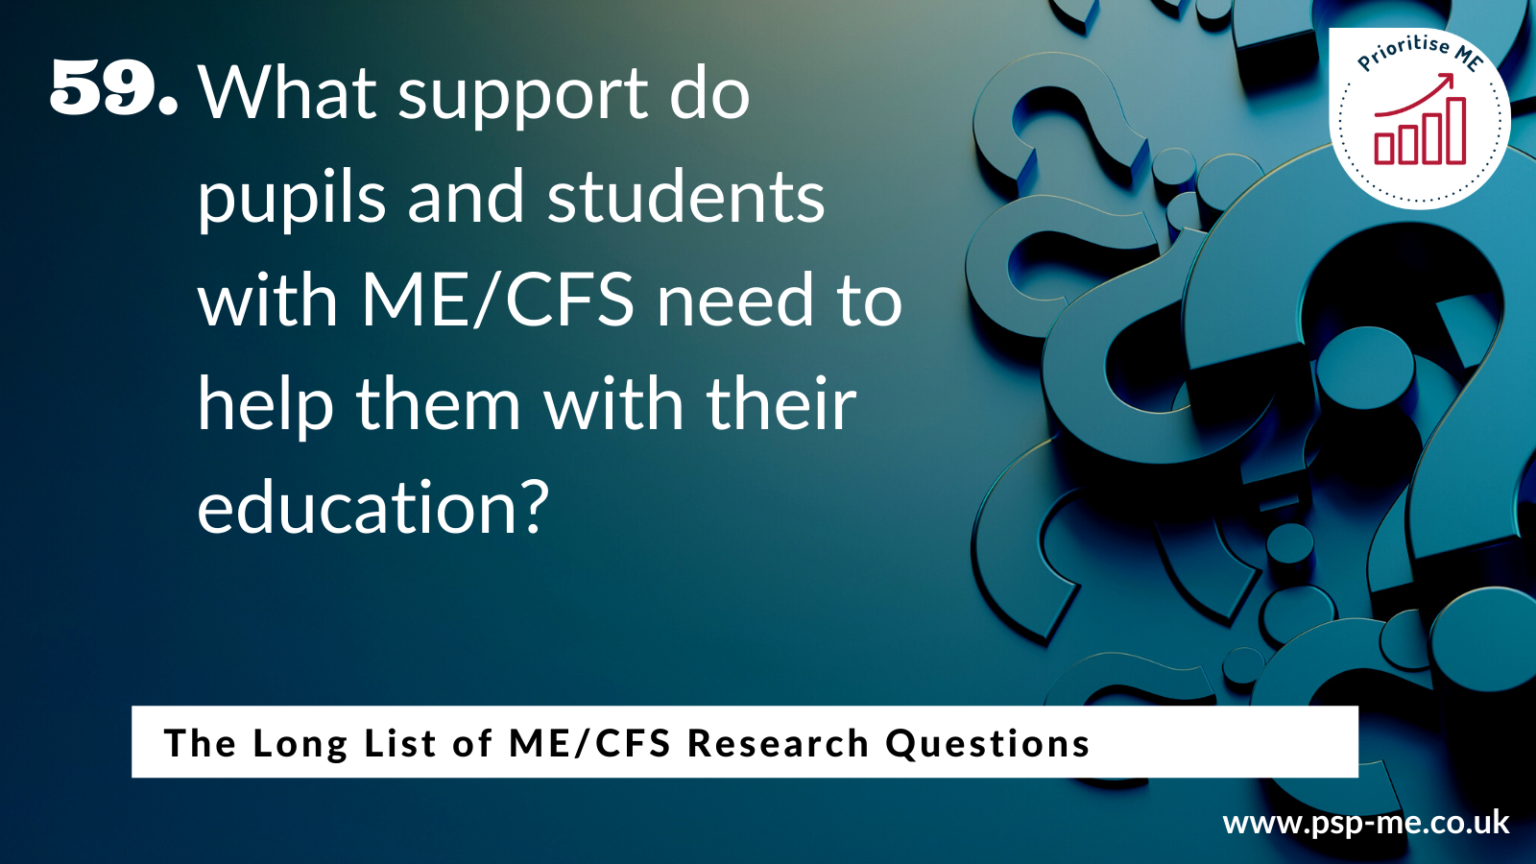 The Long List of ME_CFS Research Questions (59)